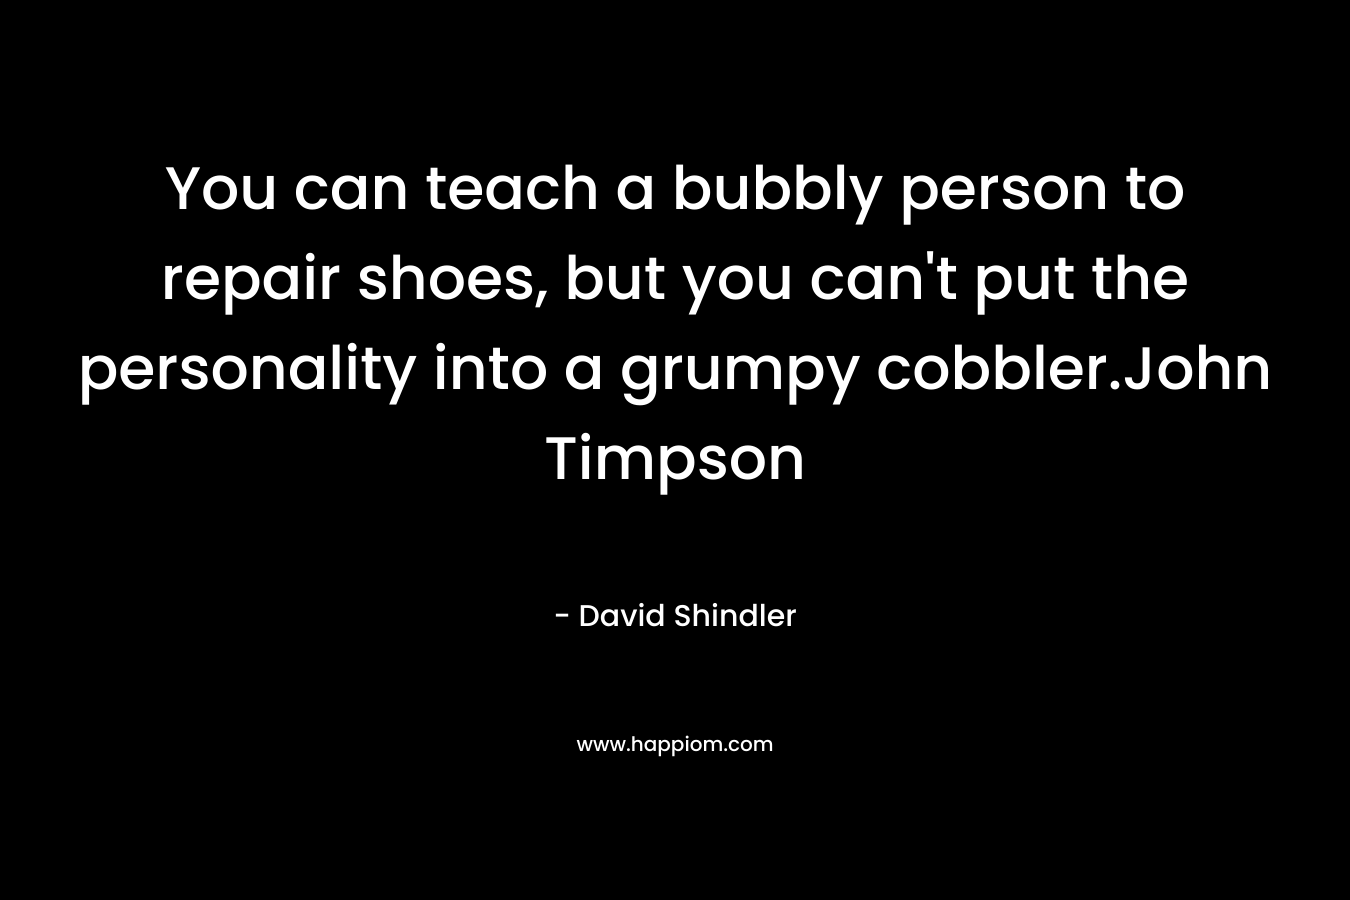 You can teach a bubbly person to repair shoes, but you can't put the personality into a grumpy cobbler.John Timpson